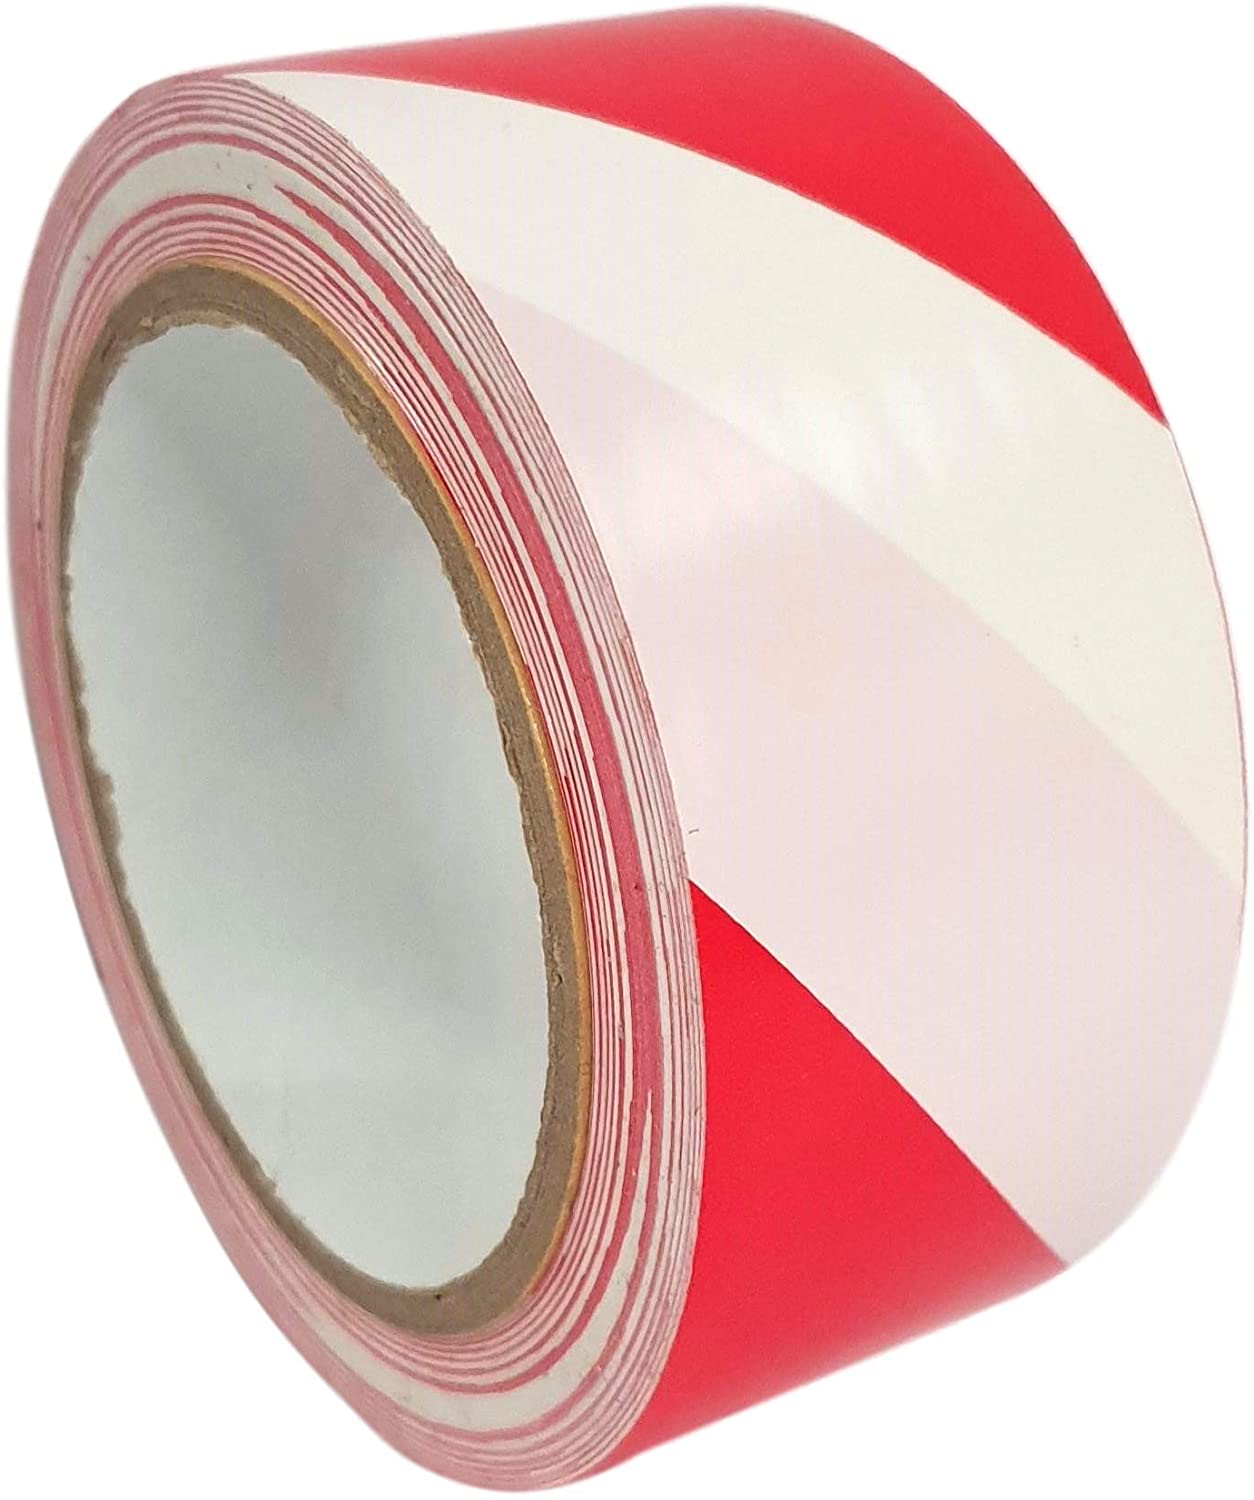 1 x ROLL OF STRONG RED/WHITE HAZARD WARNING PVC BARRIER SAFETY TAPE 50mm x 33M 